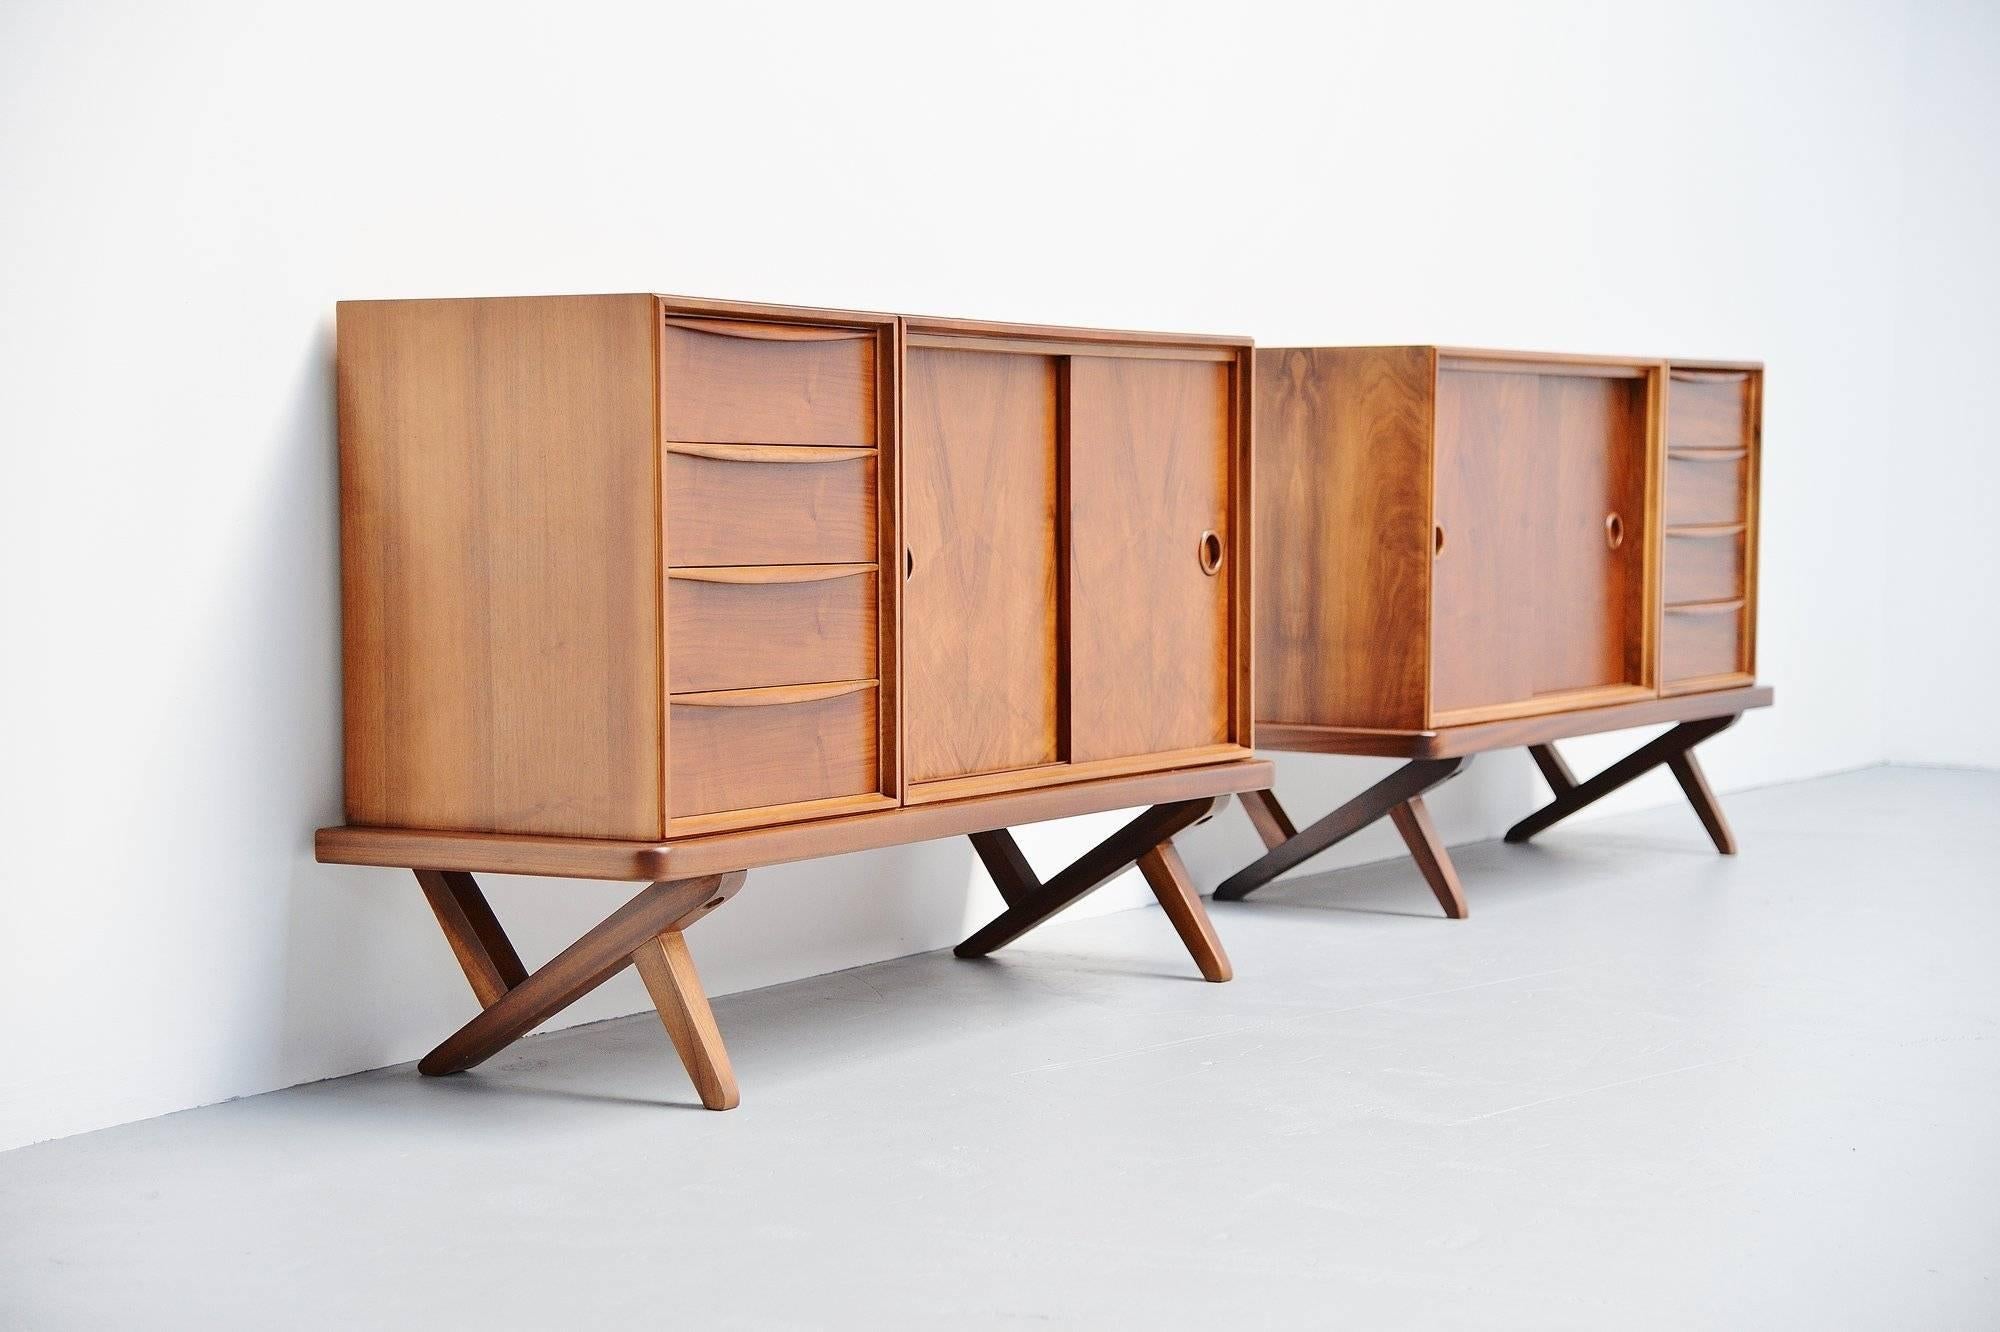 Nice pair of small credenzas designed by Rudolf Bernd Glatzel for Fristho Franeker, Holland 1955. These walnut credenzas have 4 drawers on the left and 2 sliding doors on the right with a shelve behind, or the opposite as this is a mirrored pair.